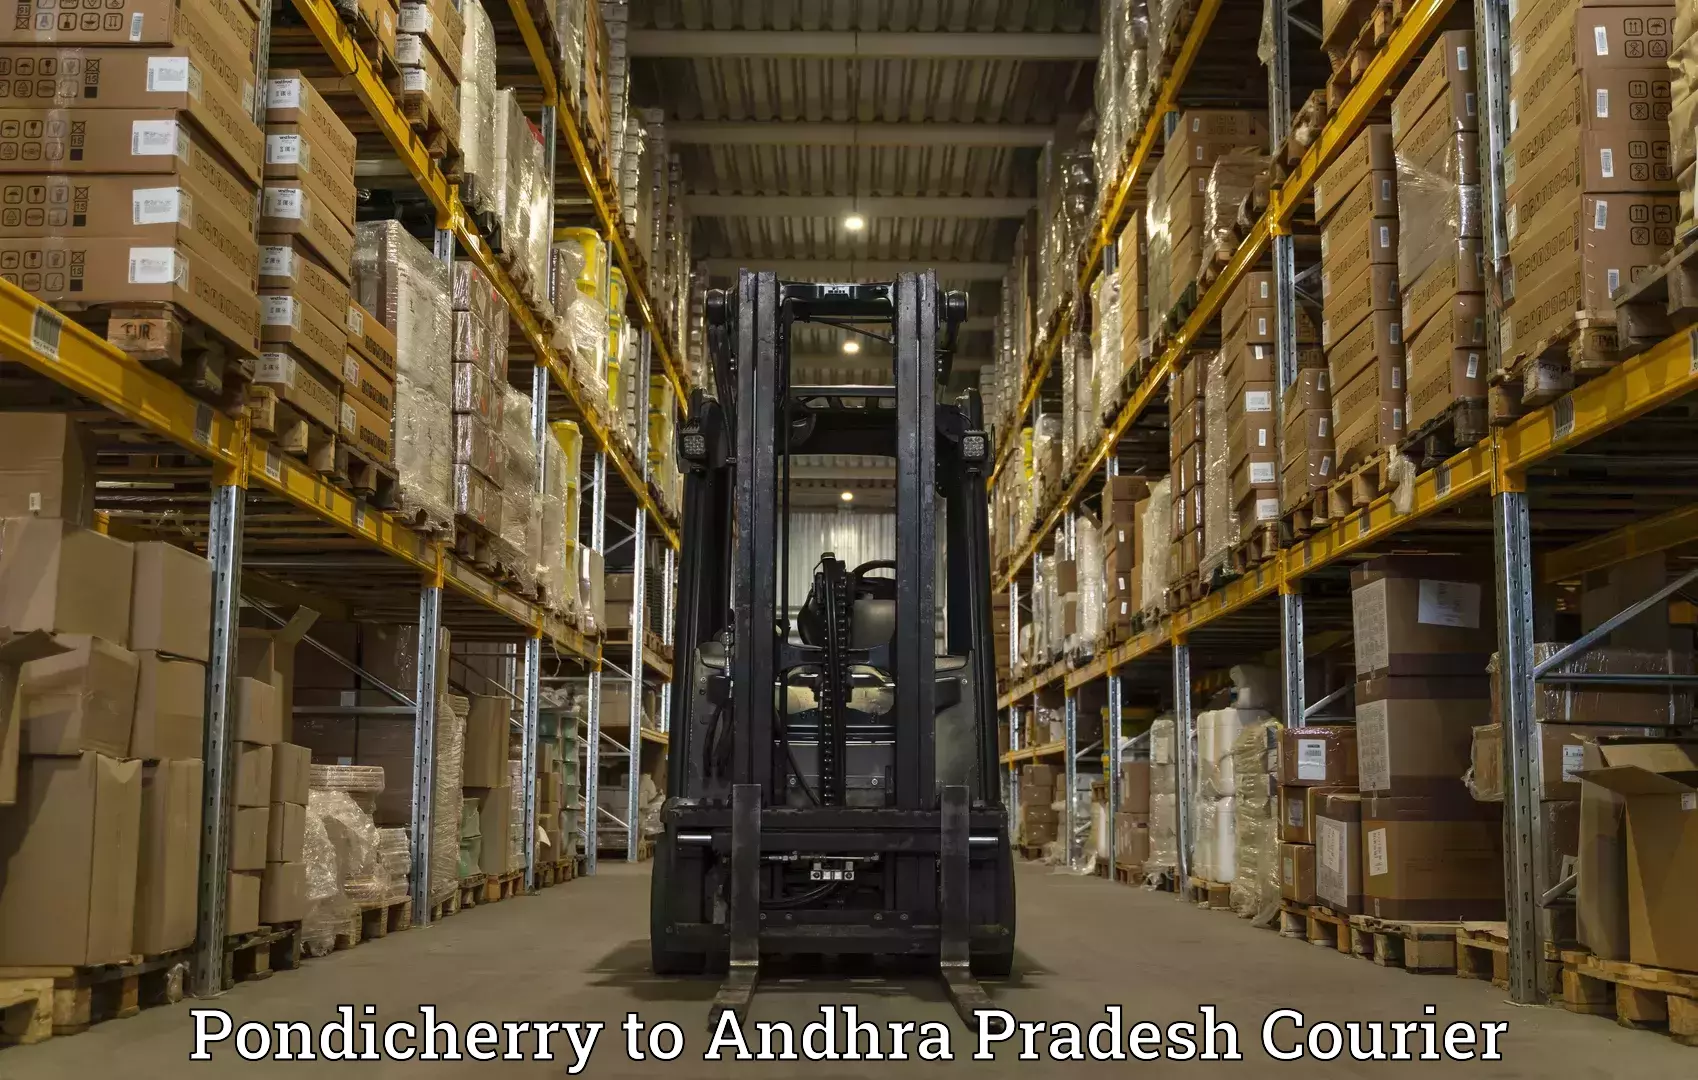 Express delivery capabilities Pondicherry to Tirupati